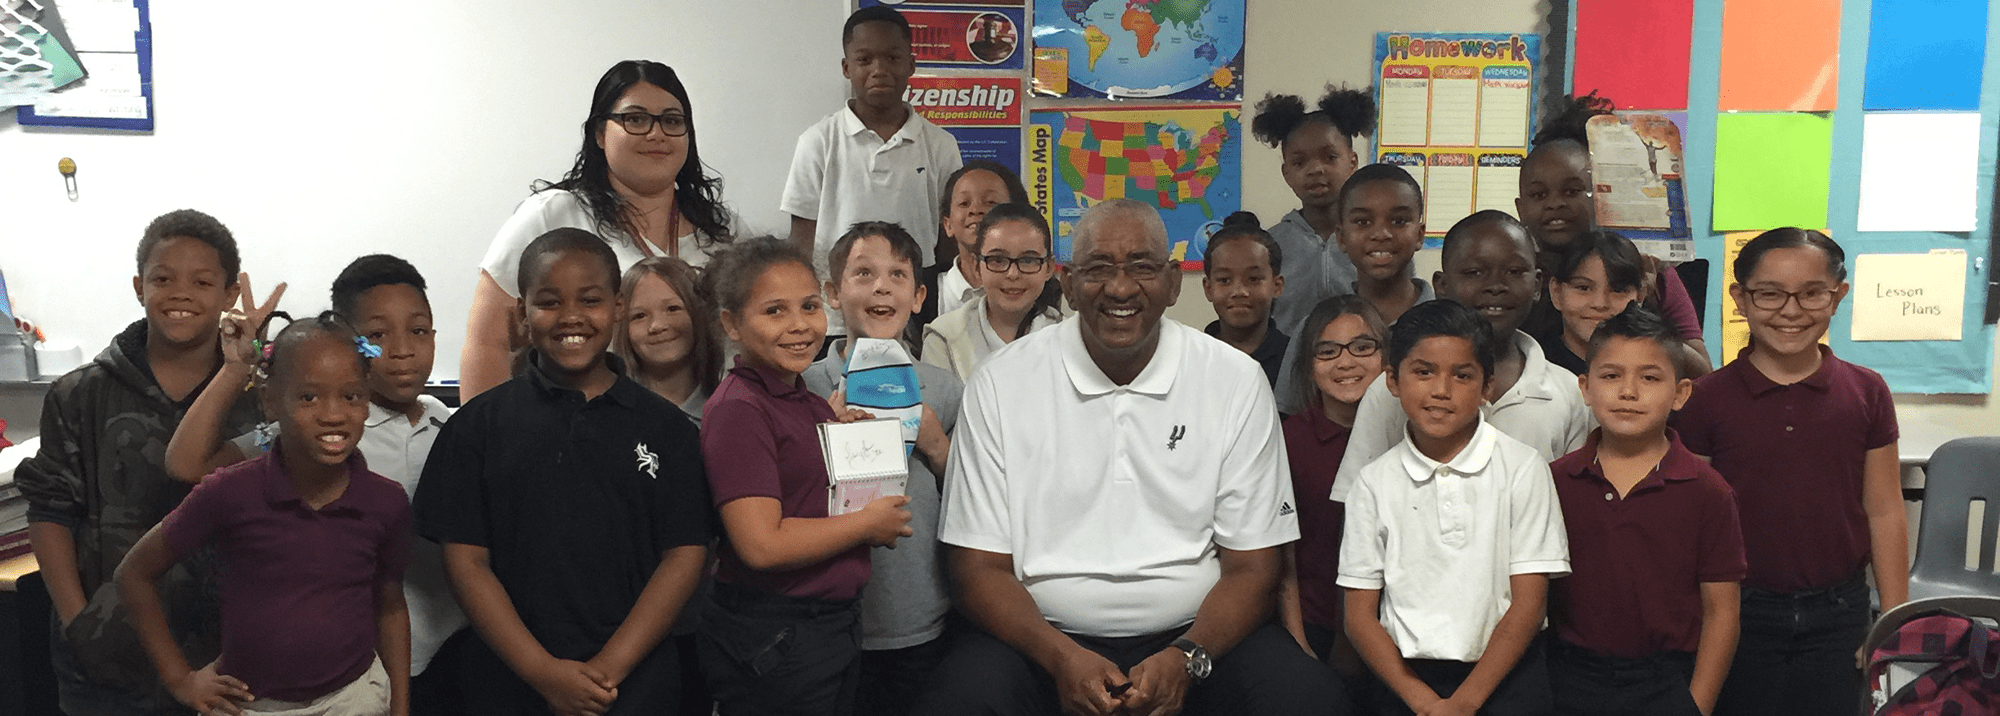 Group of students posing with George Gervin